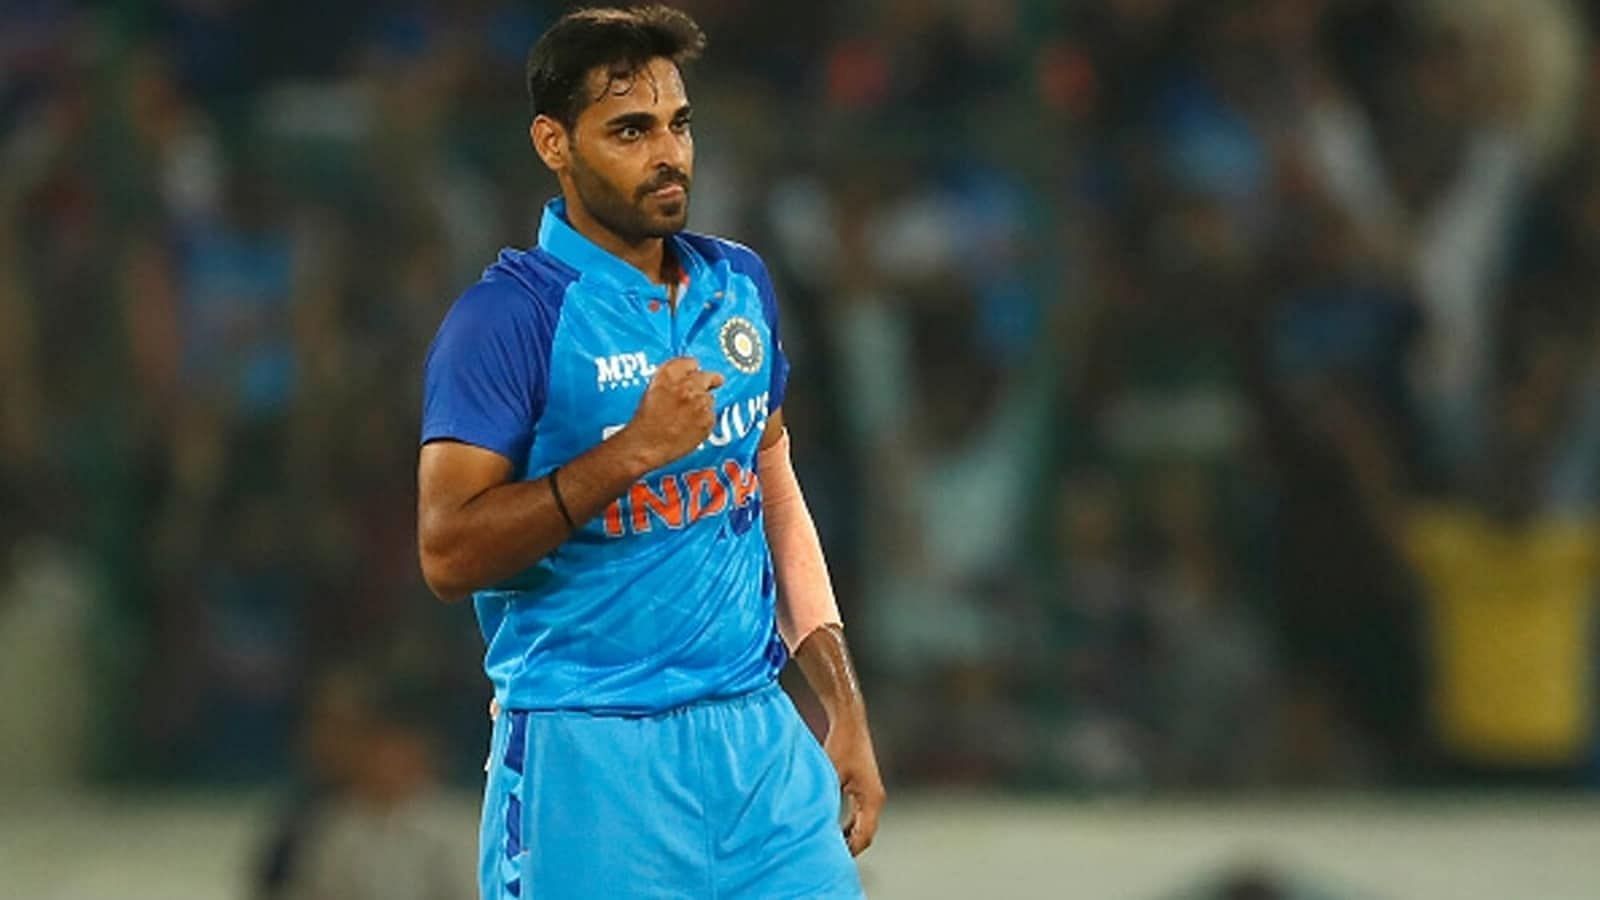 Bhuvneshwar Kumar picked up 16 wickets in seven games in the recently concluded Syed Mushtaq Ali Trophy.